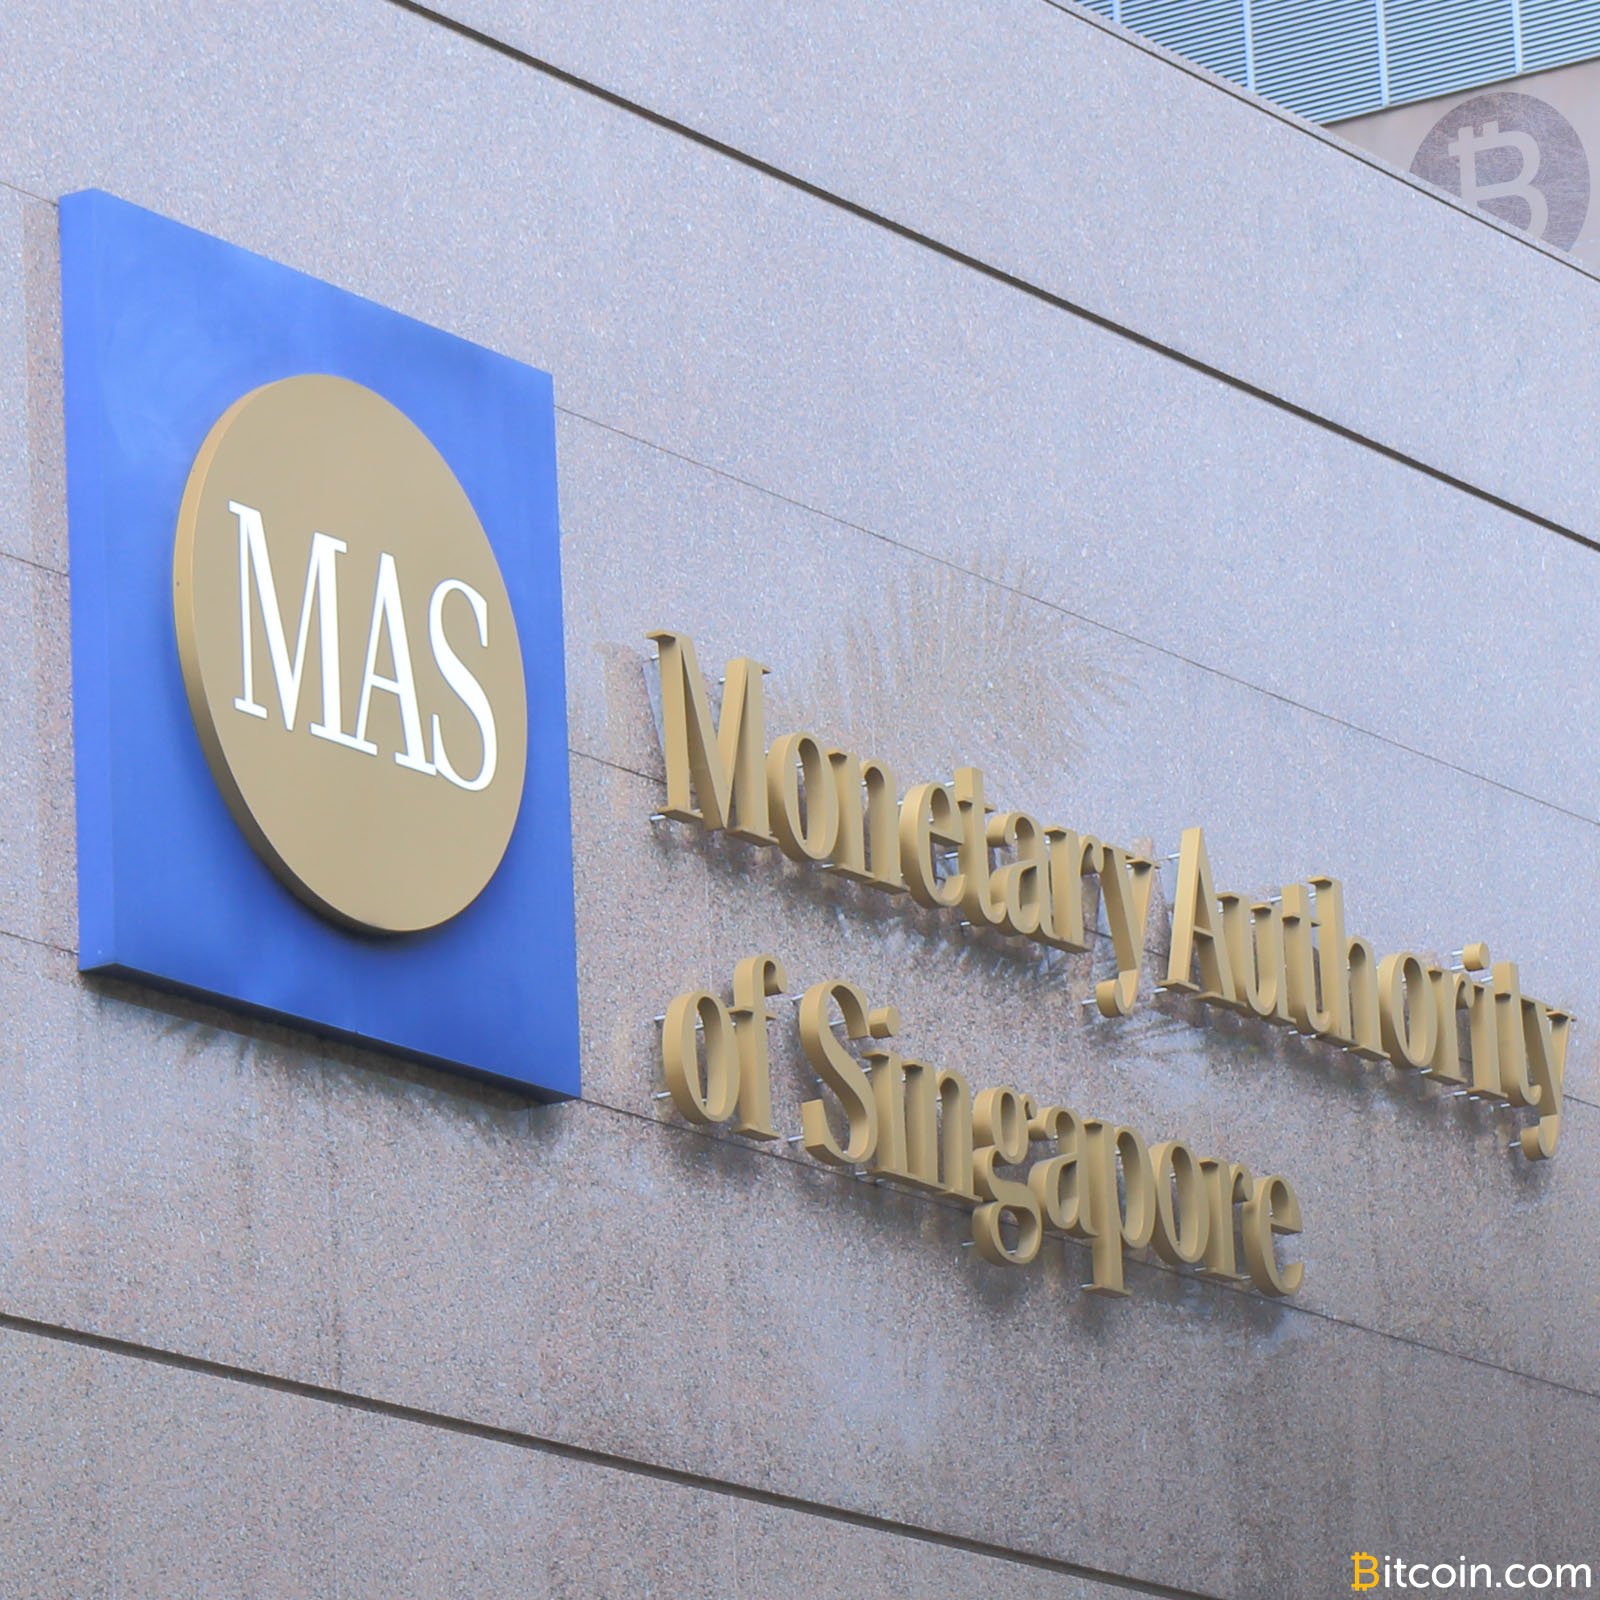 Central Bank of Singapore Sees No Reason to Regulate Cryptocurrencies